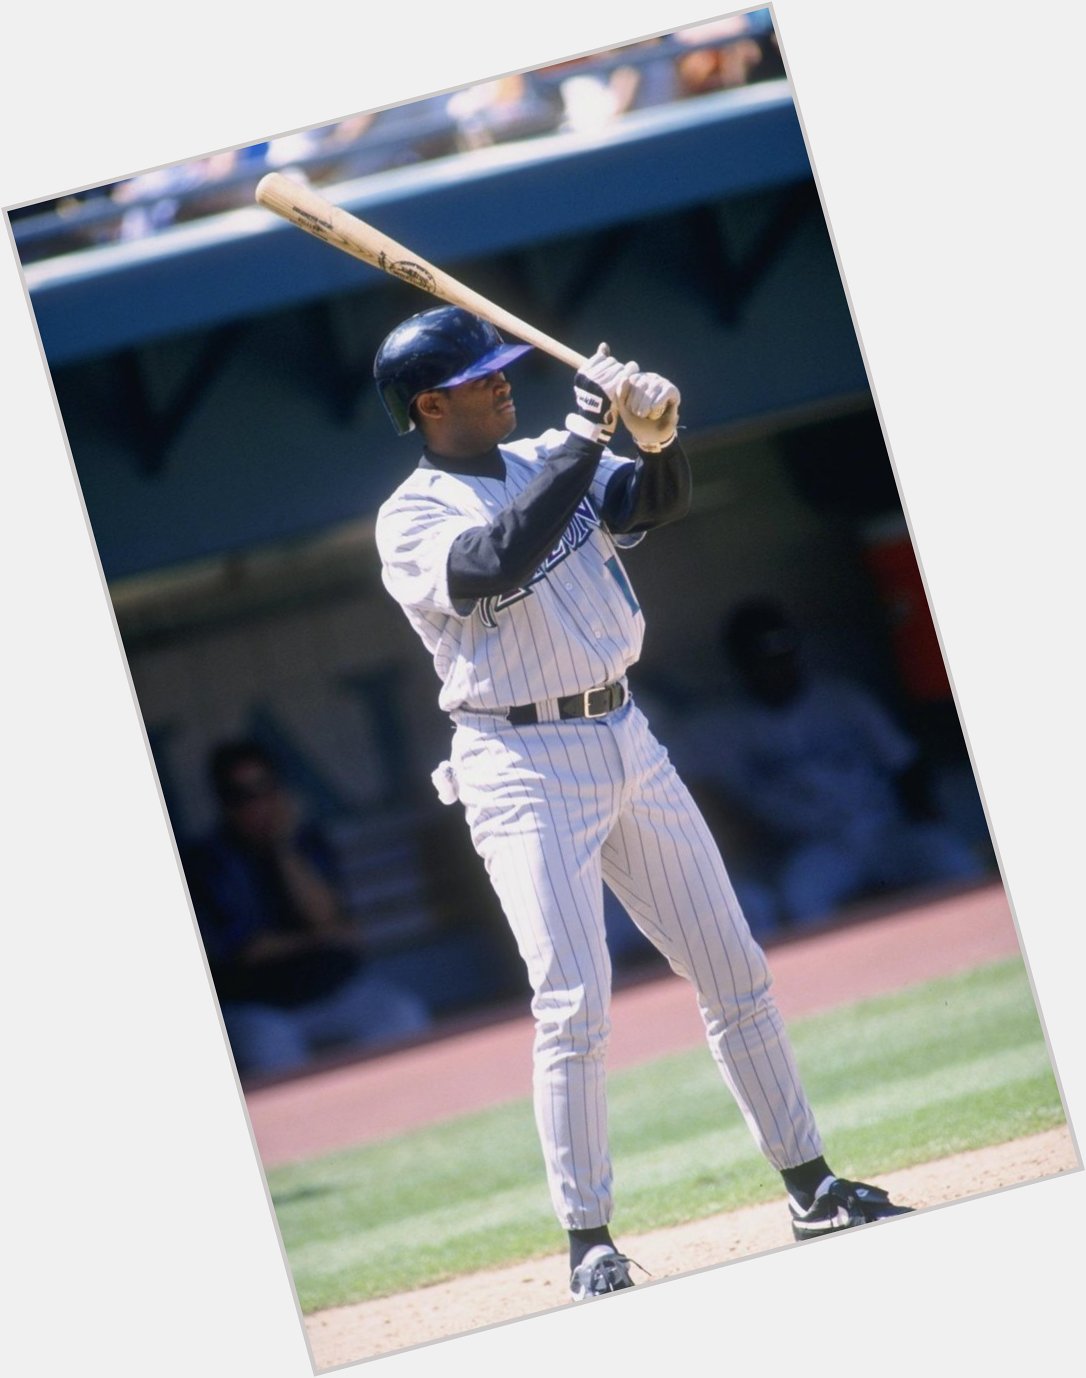 Happy 41st birthday to Tony Batista, who had one of our favorite batting stances of all time. 